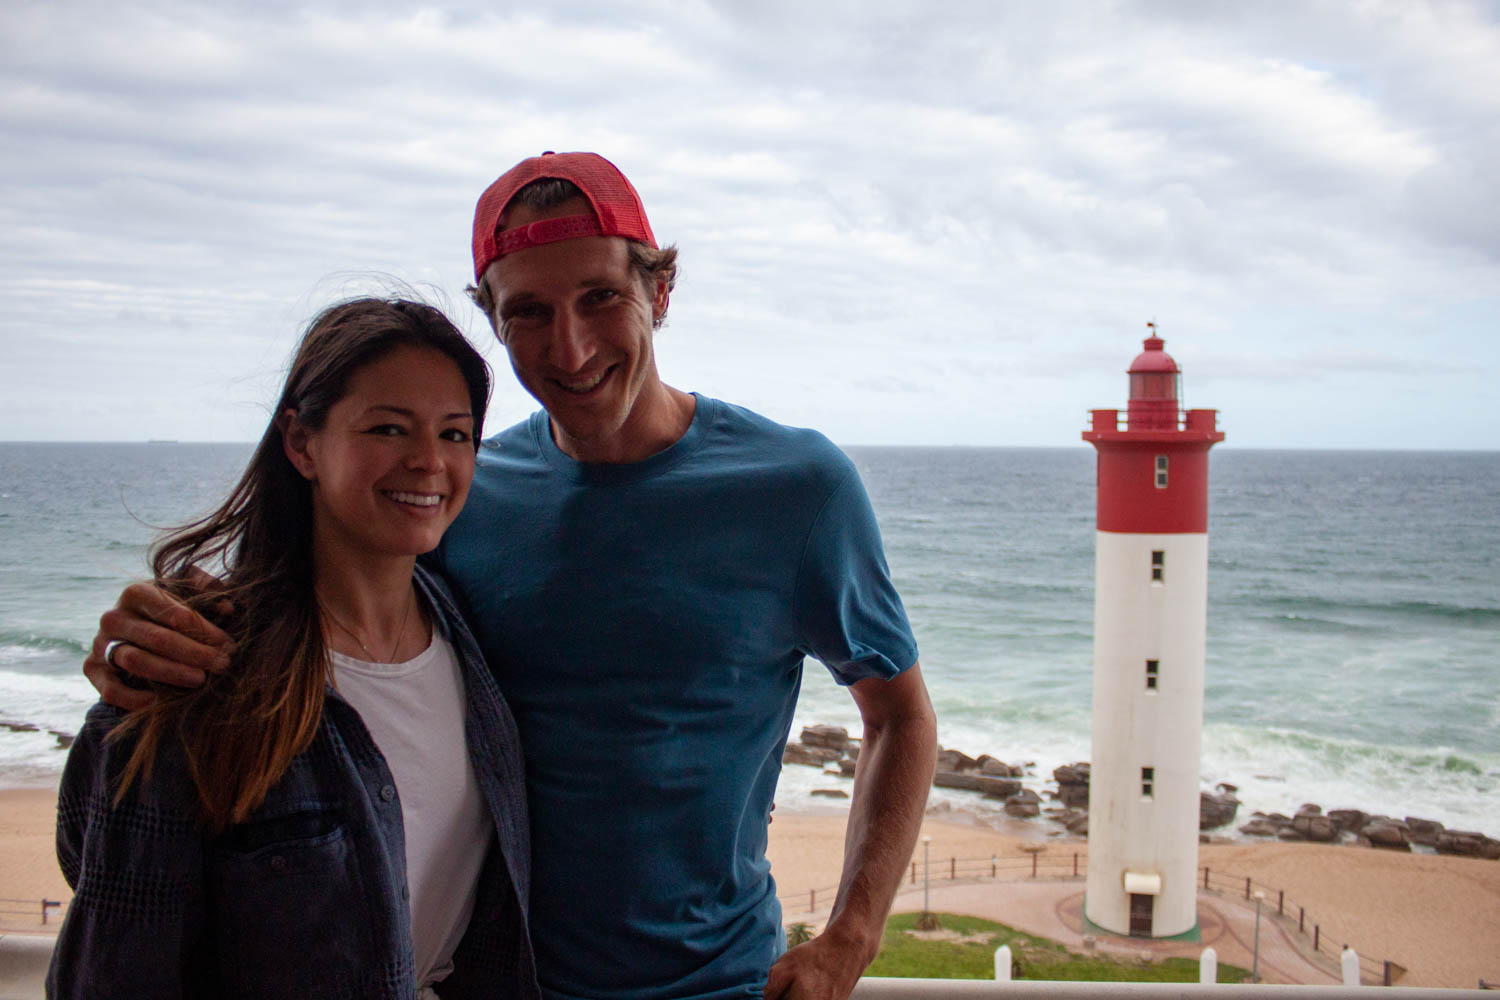 Chris and Kim in front of Lighthouse in Umhlanga